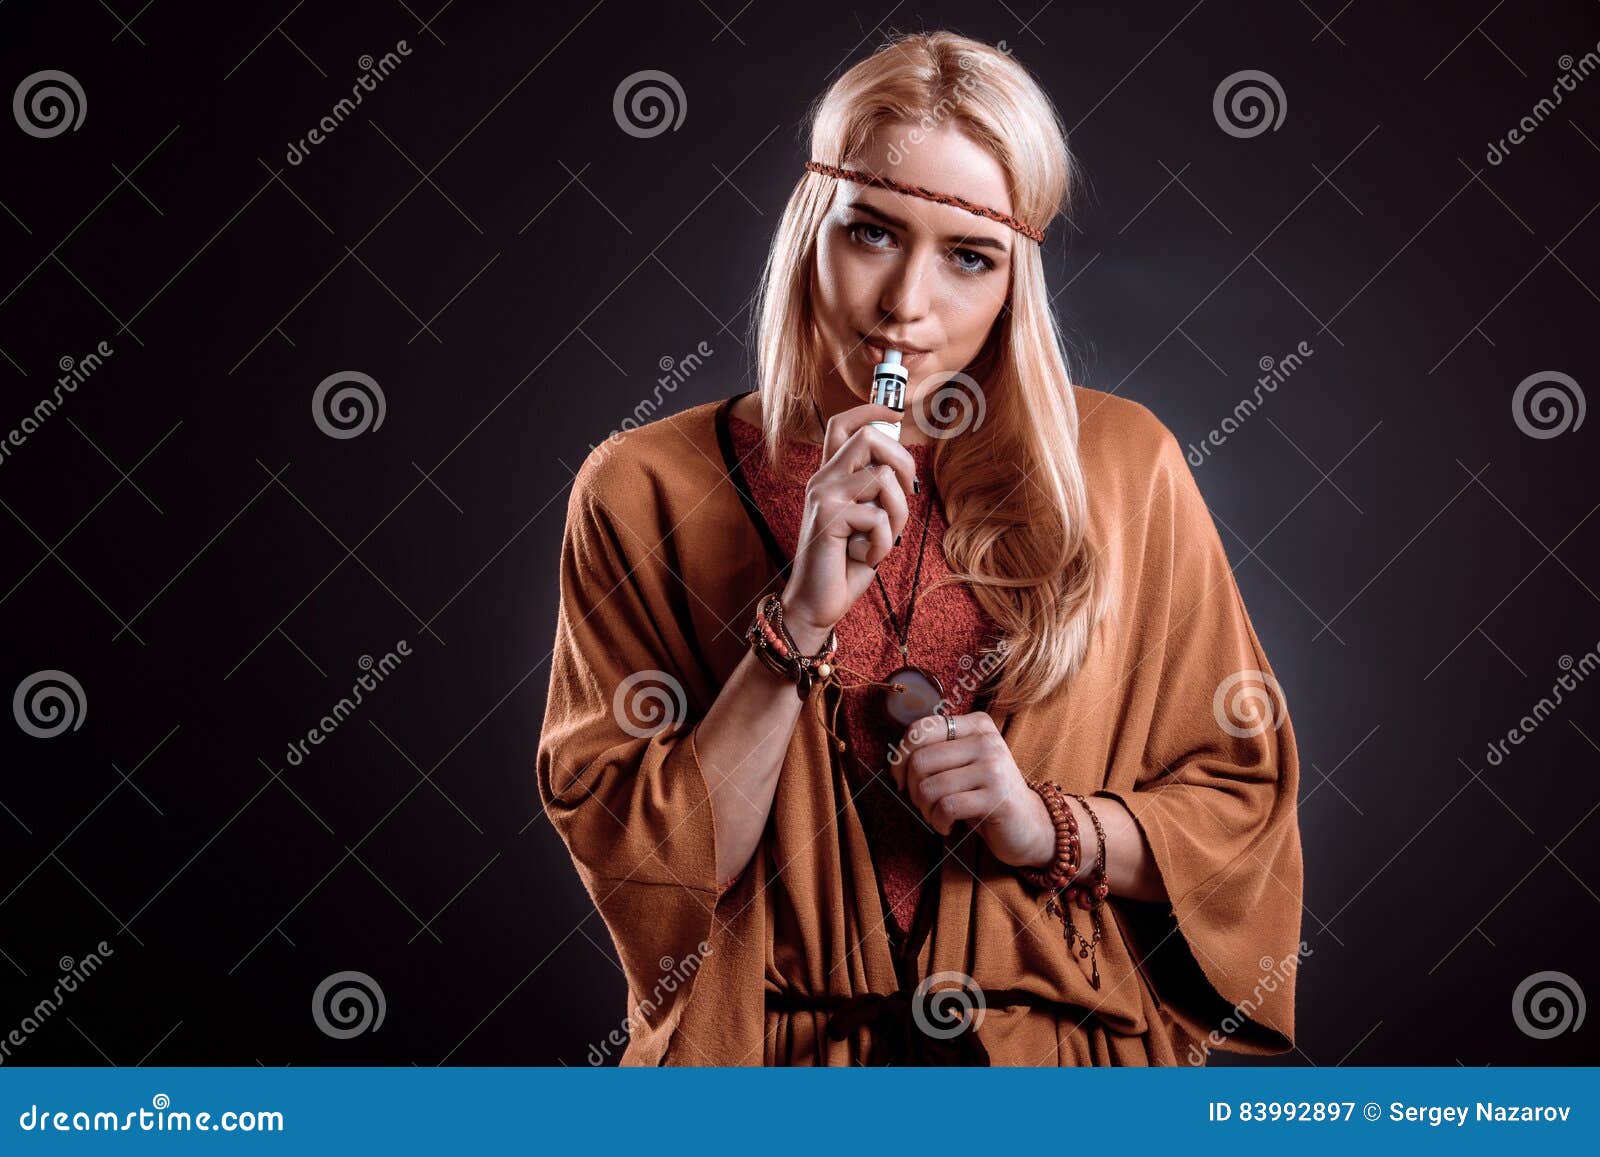 Young Woman In The Boho Style Blowing Smoke Stock Image